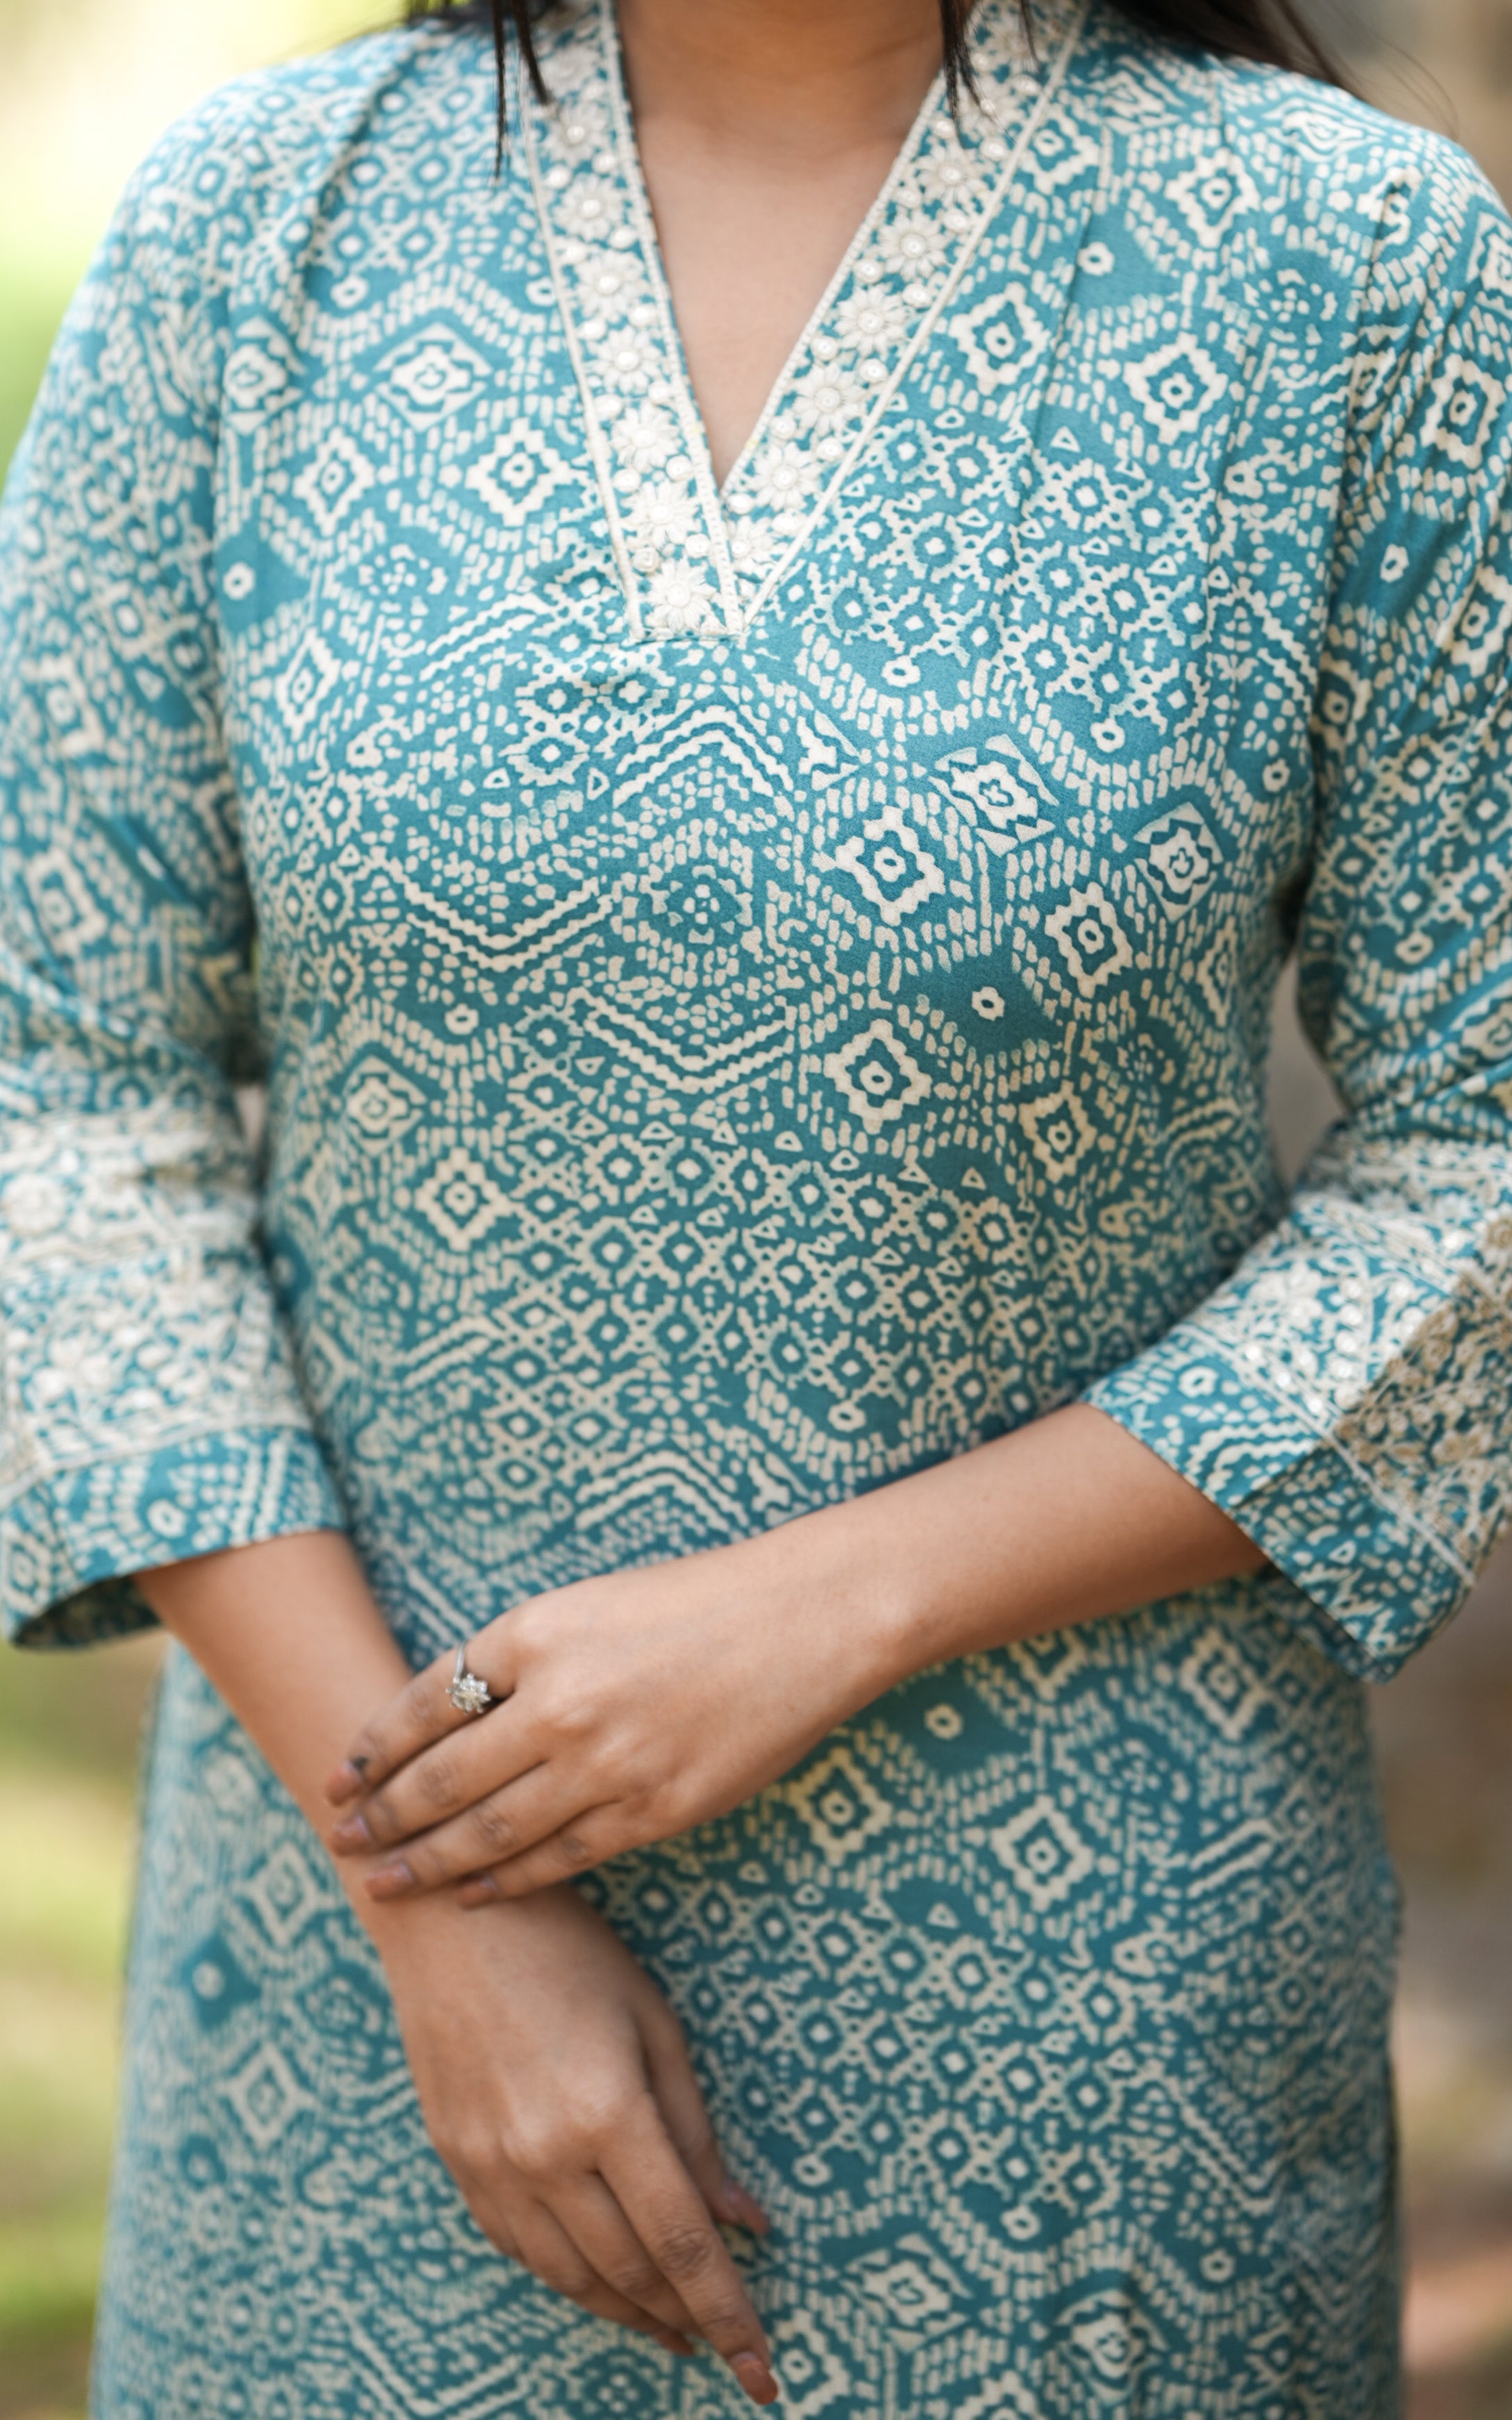 printed chiffon with v neck collar in silver worked design in teal blue colour printed chiffon fabric 3/4th sleeves 